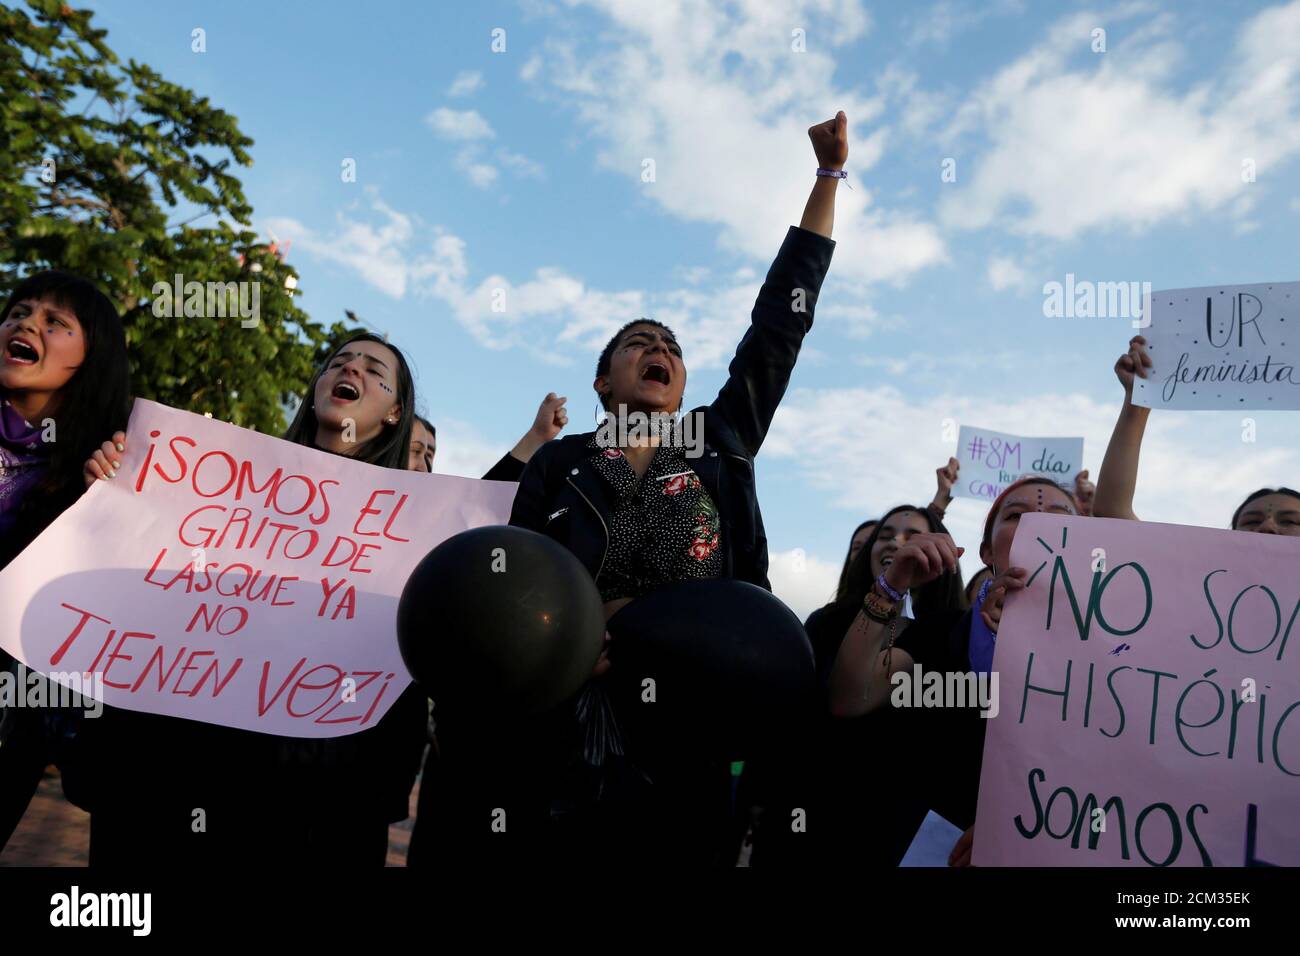 A woman holds up a placard that reads 'We are the cry of those who have no voice' during a march to mark International Women's Day in Bogota, Colombia March 8, 2019. REUTERS/Luisa Gonzalez Stock Photo